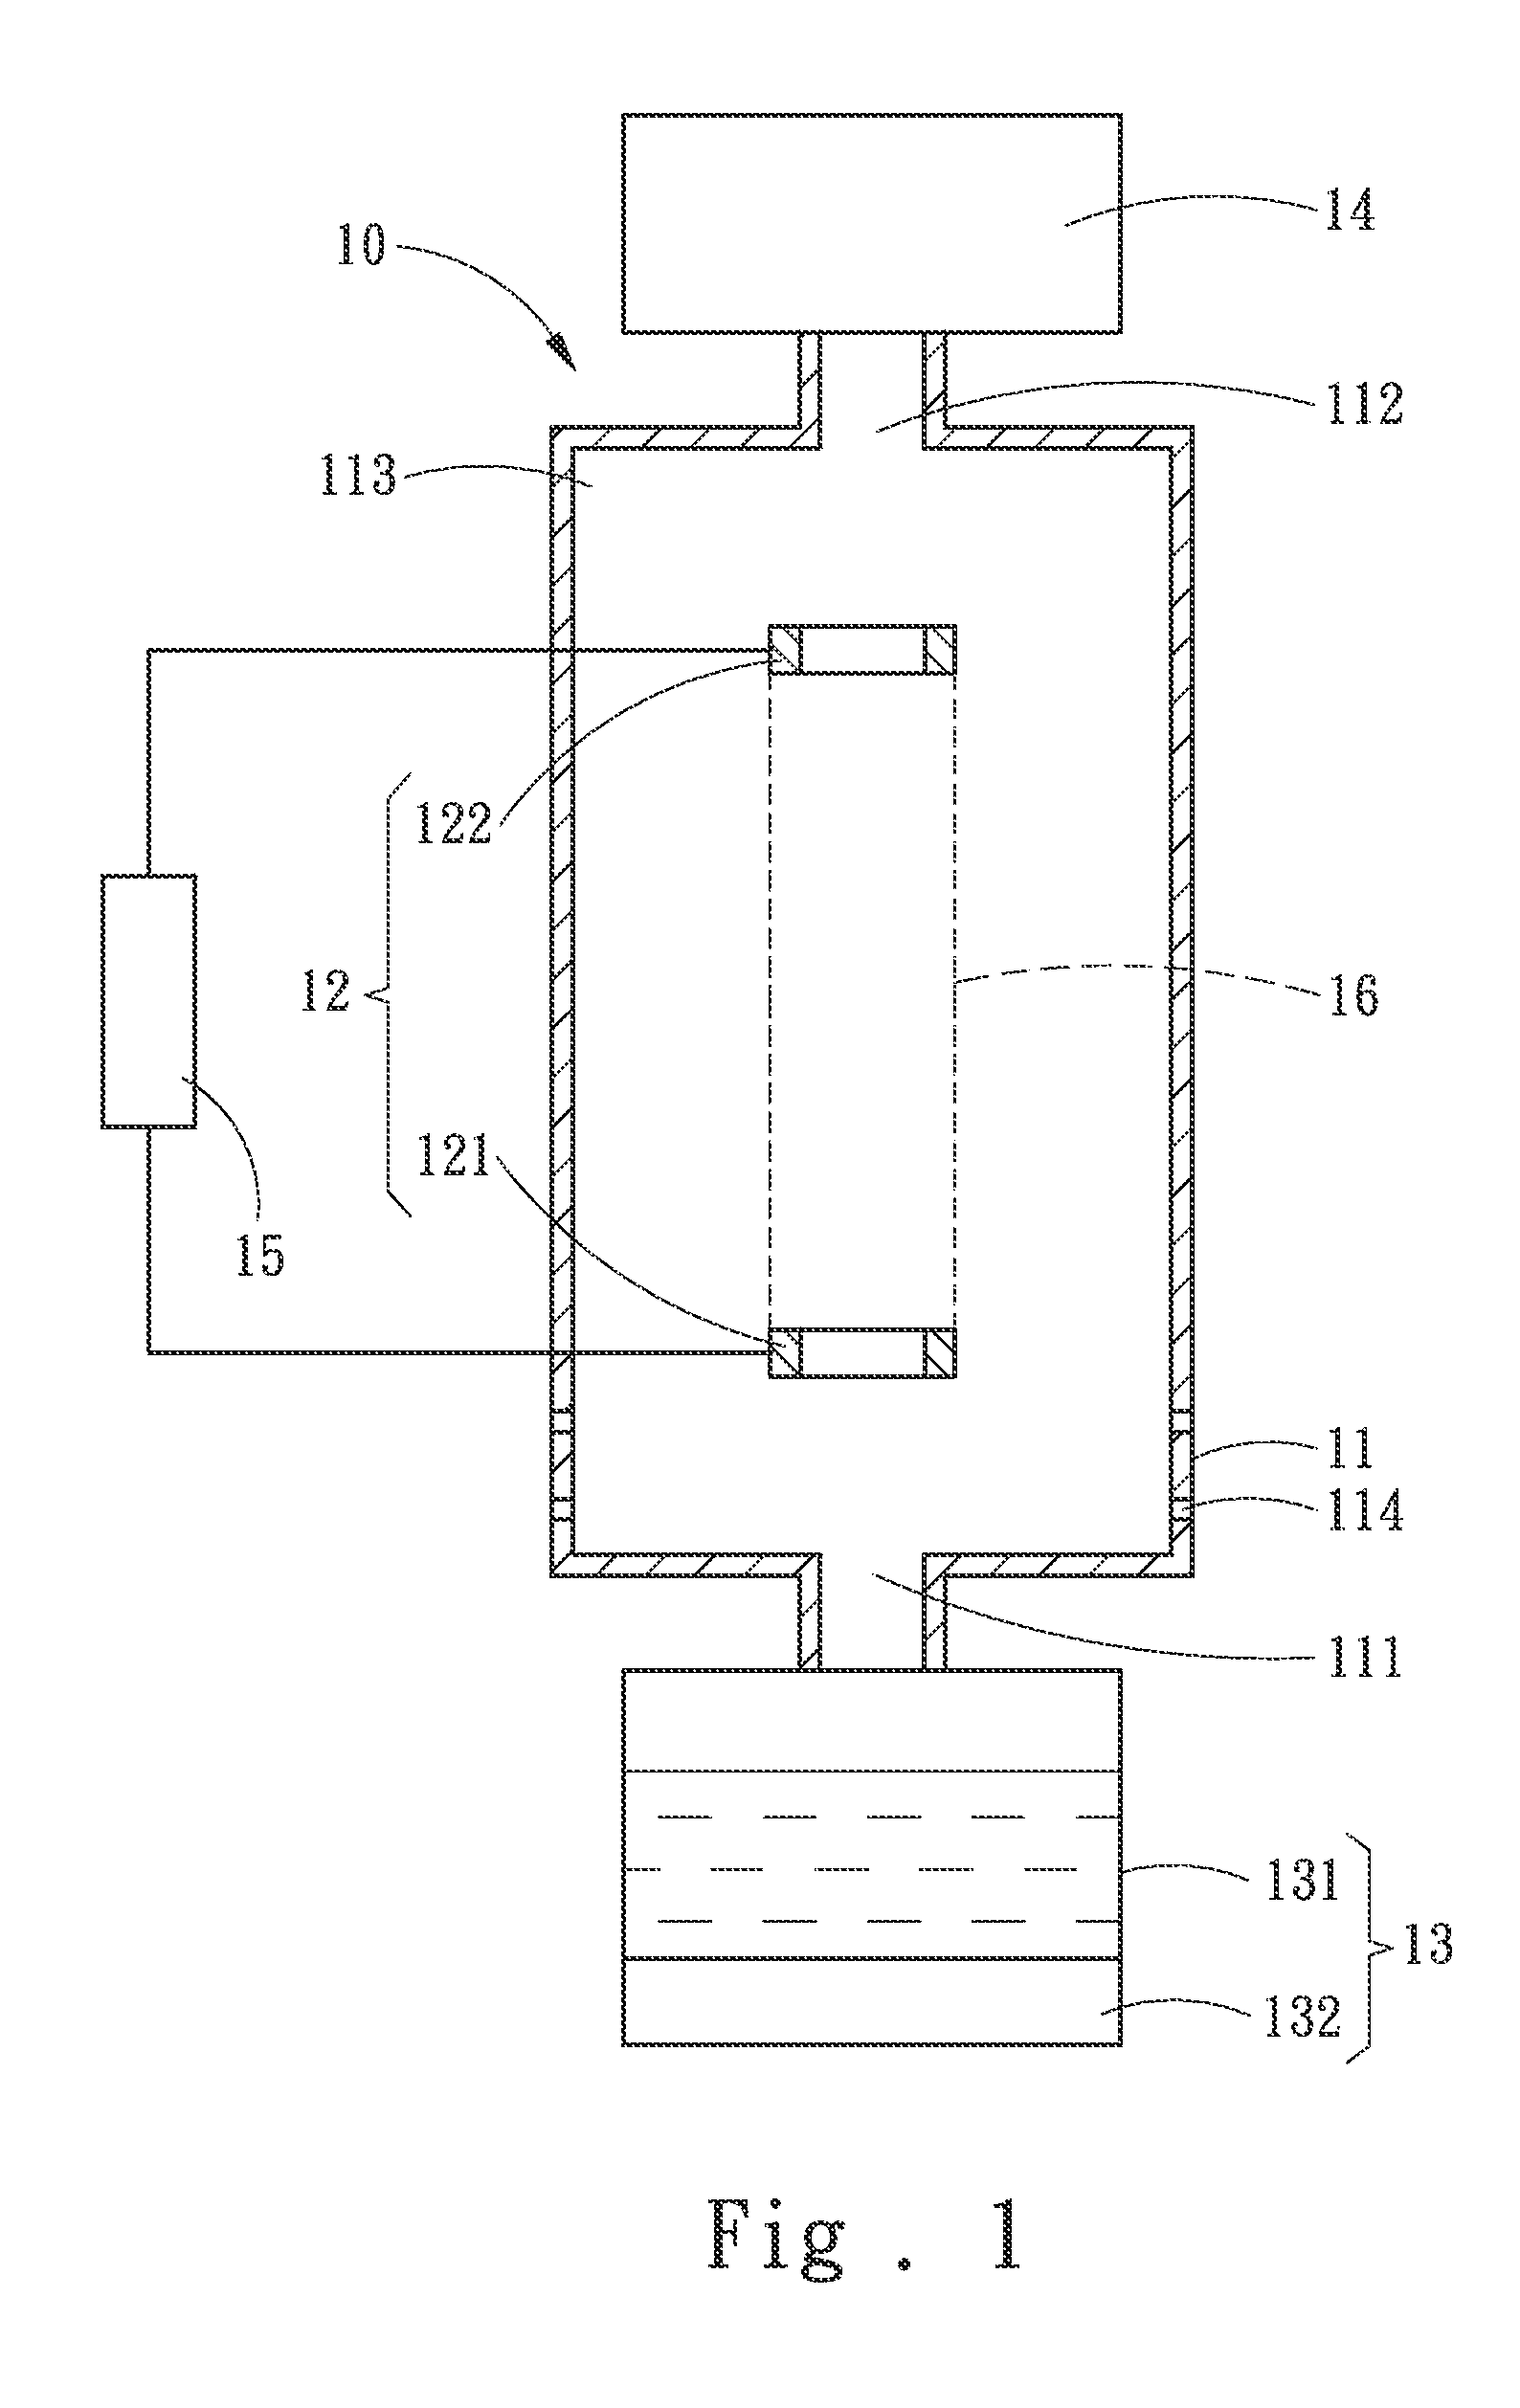 Module applying a hydrogen generating device for supporting combustion of an internal combustion engine